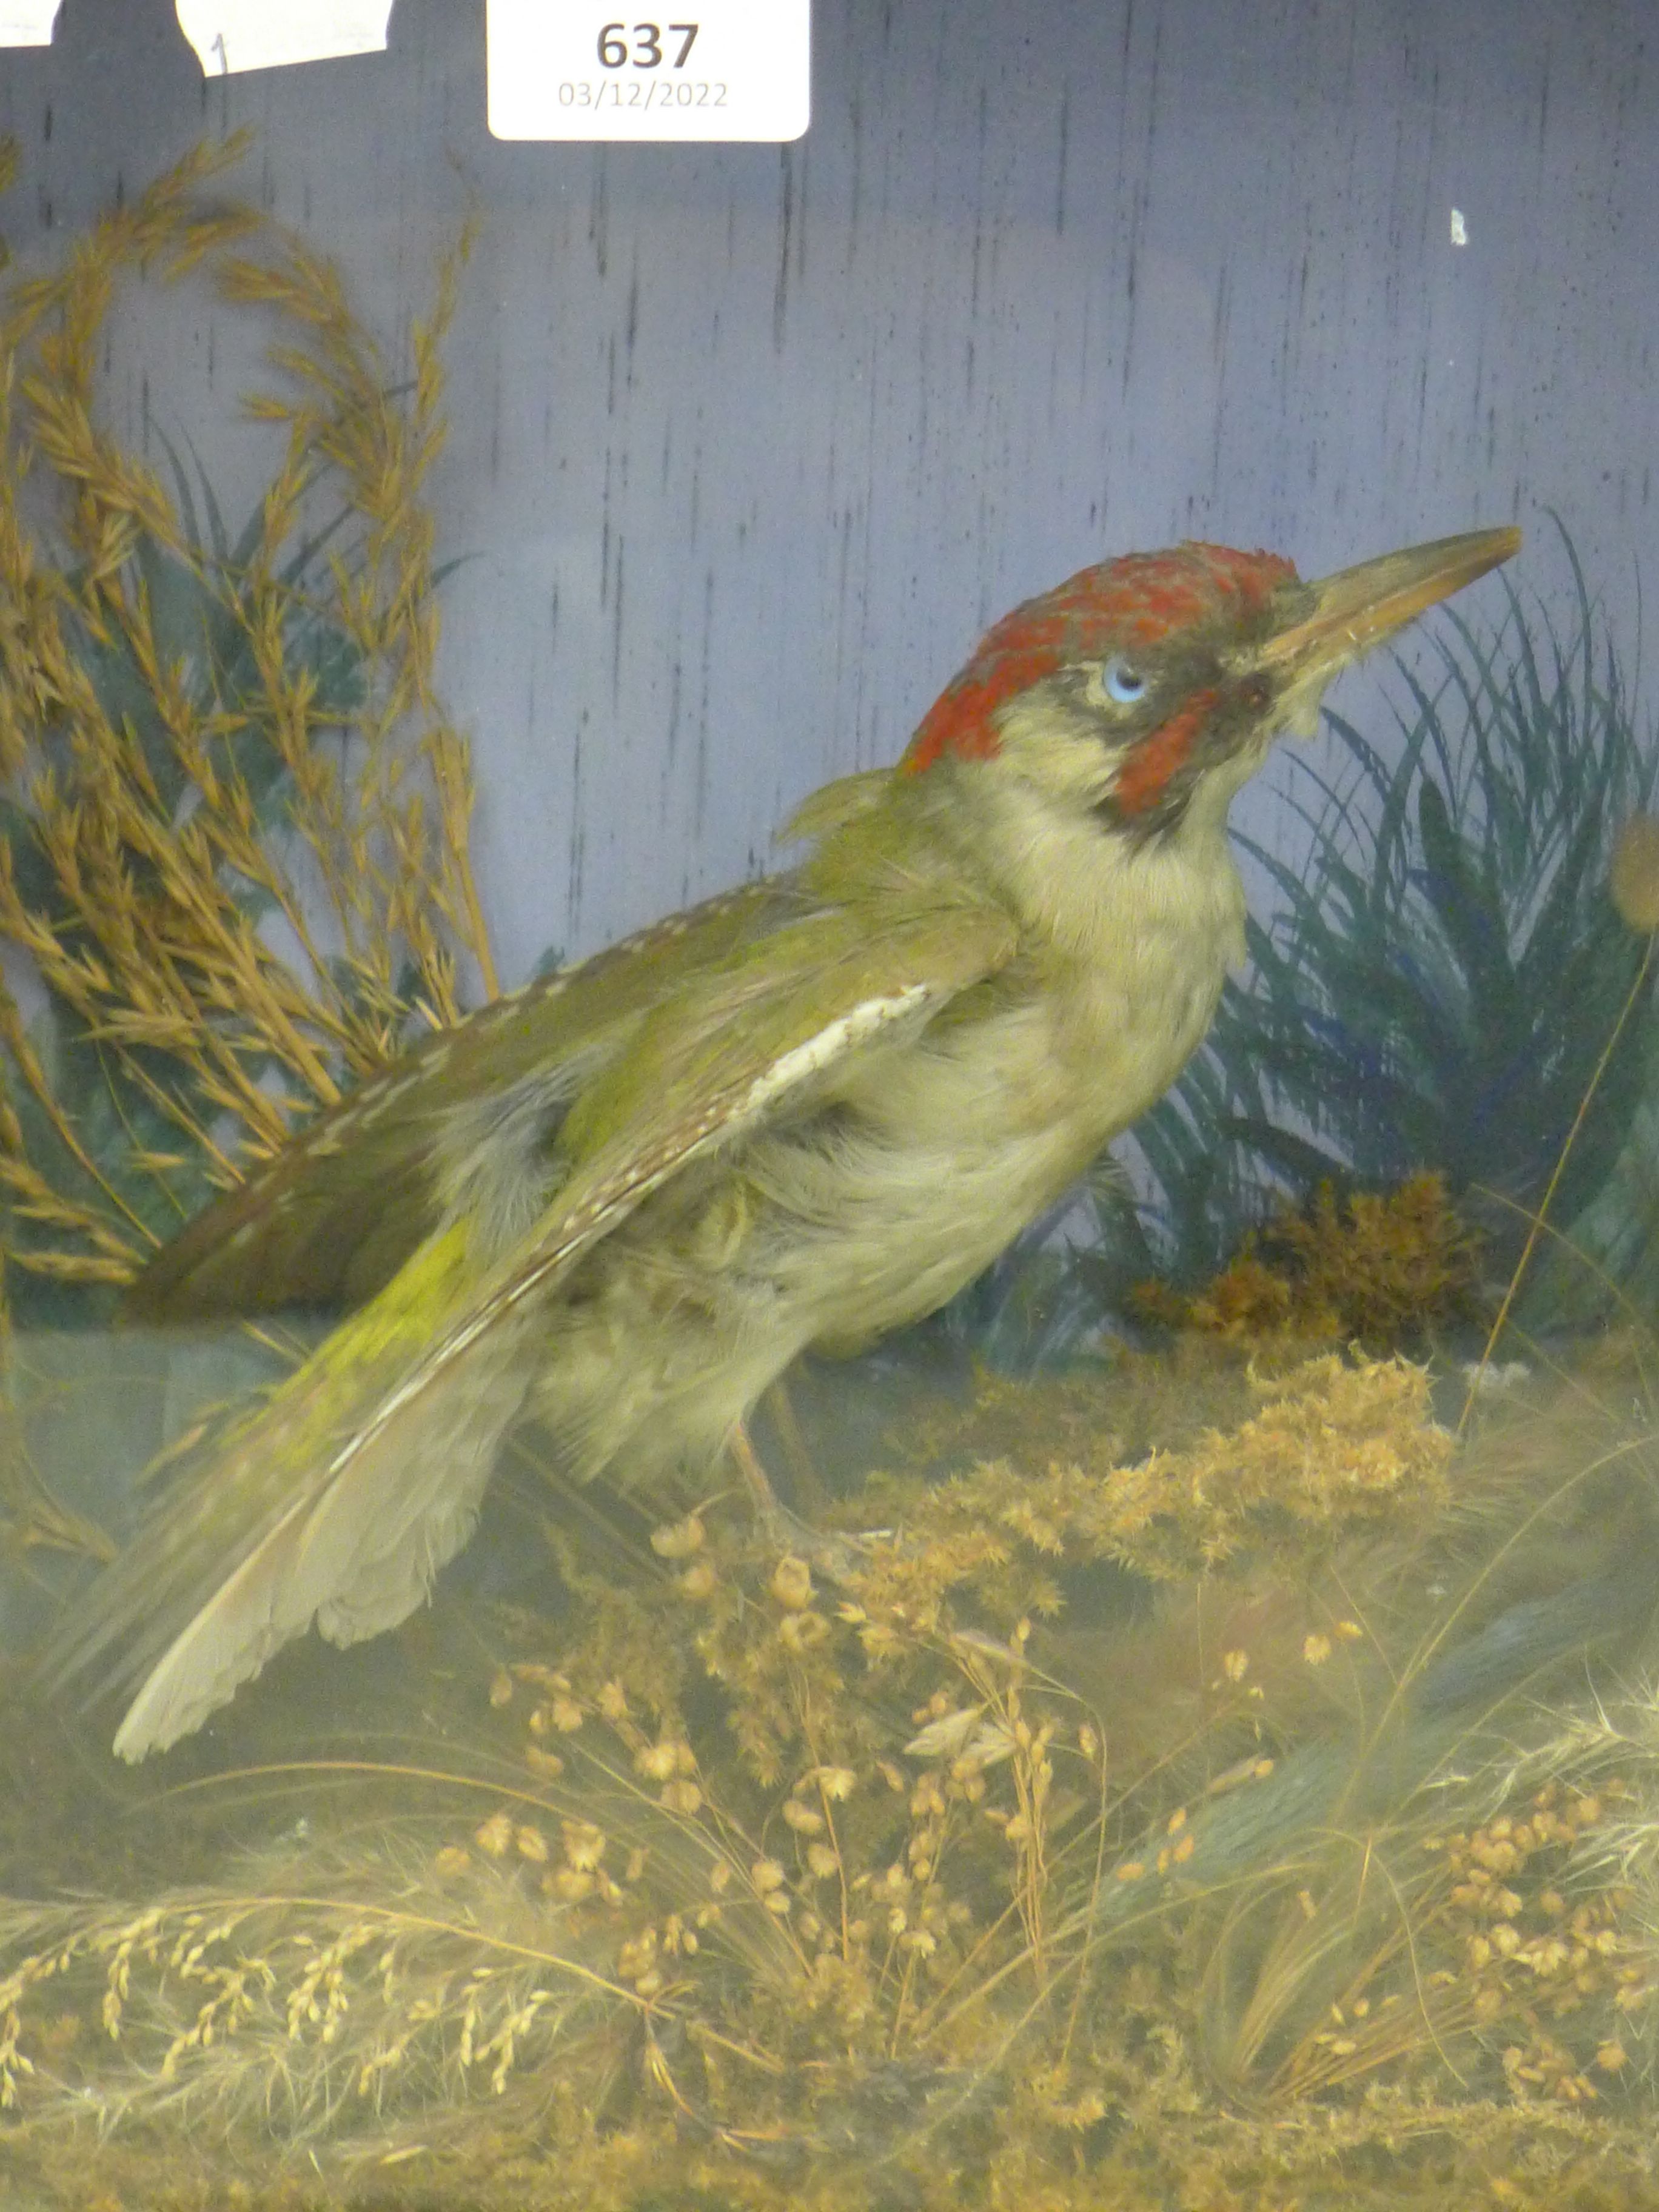 A taxidermy specimen of a preserved Green woodpecker (Picus viridis) in a wooden and glazed case. - Image 2 of 4